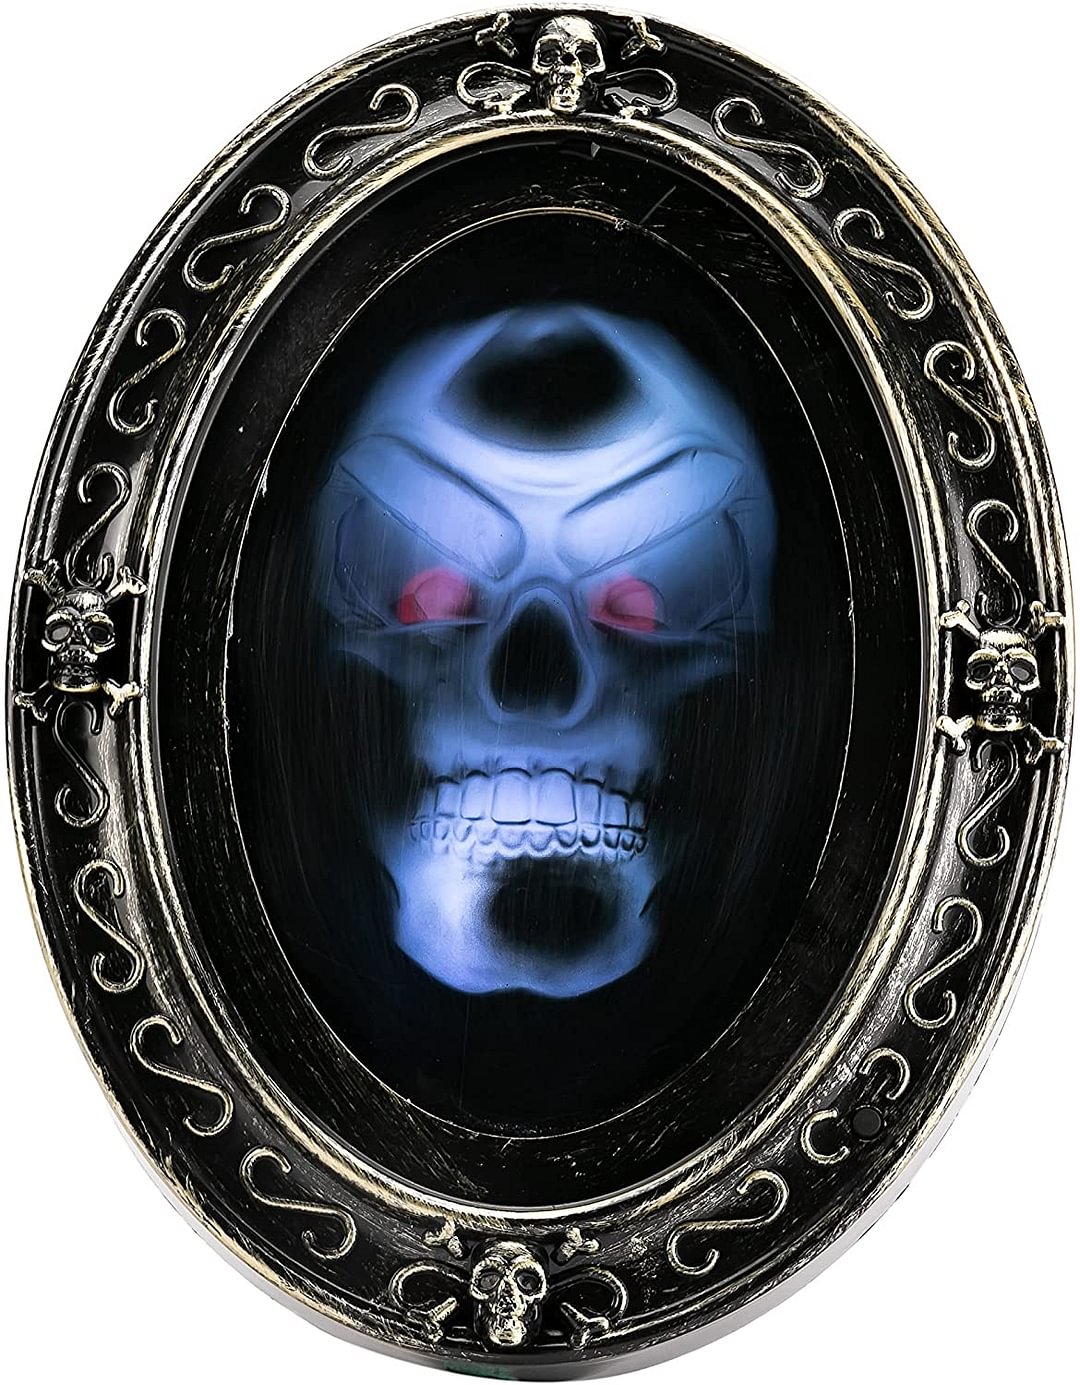 Motion Activated Skull Mirror - vzzhome